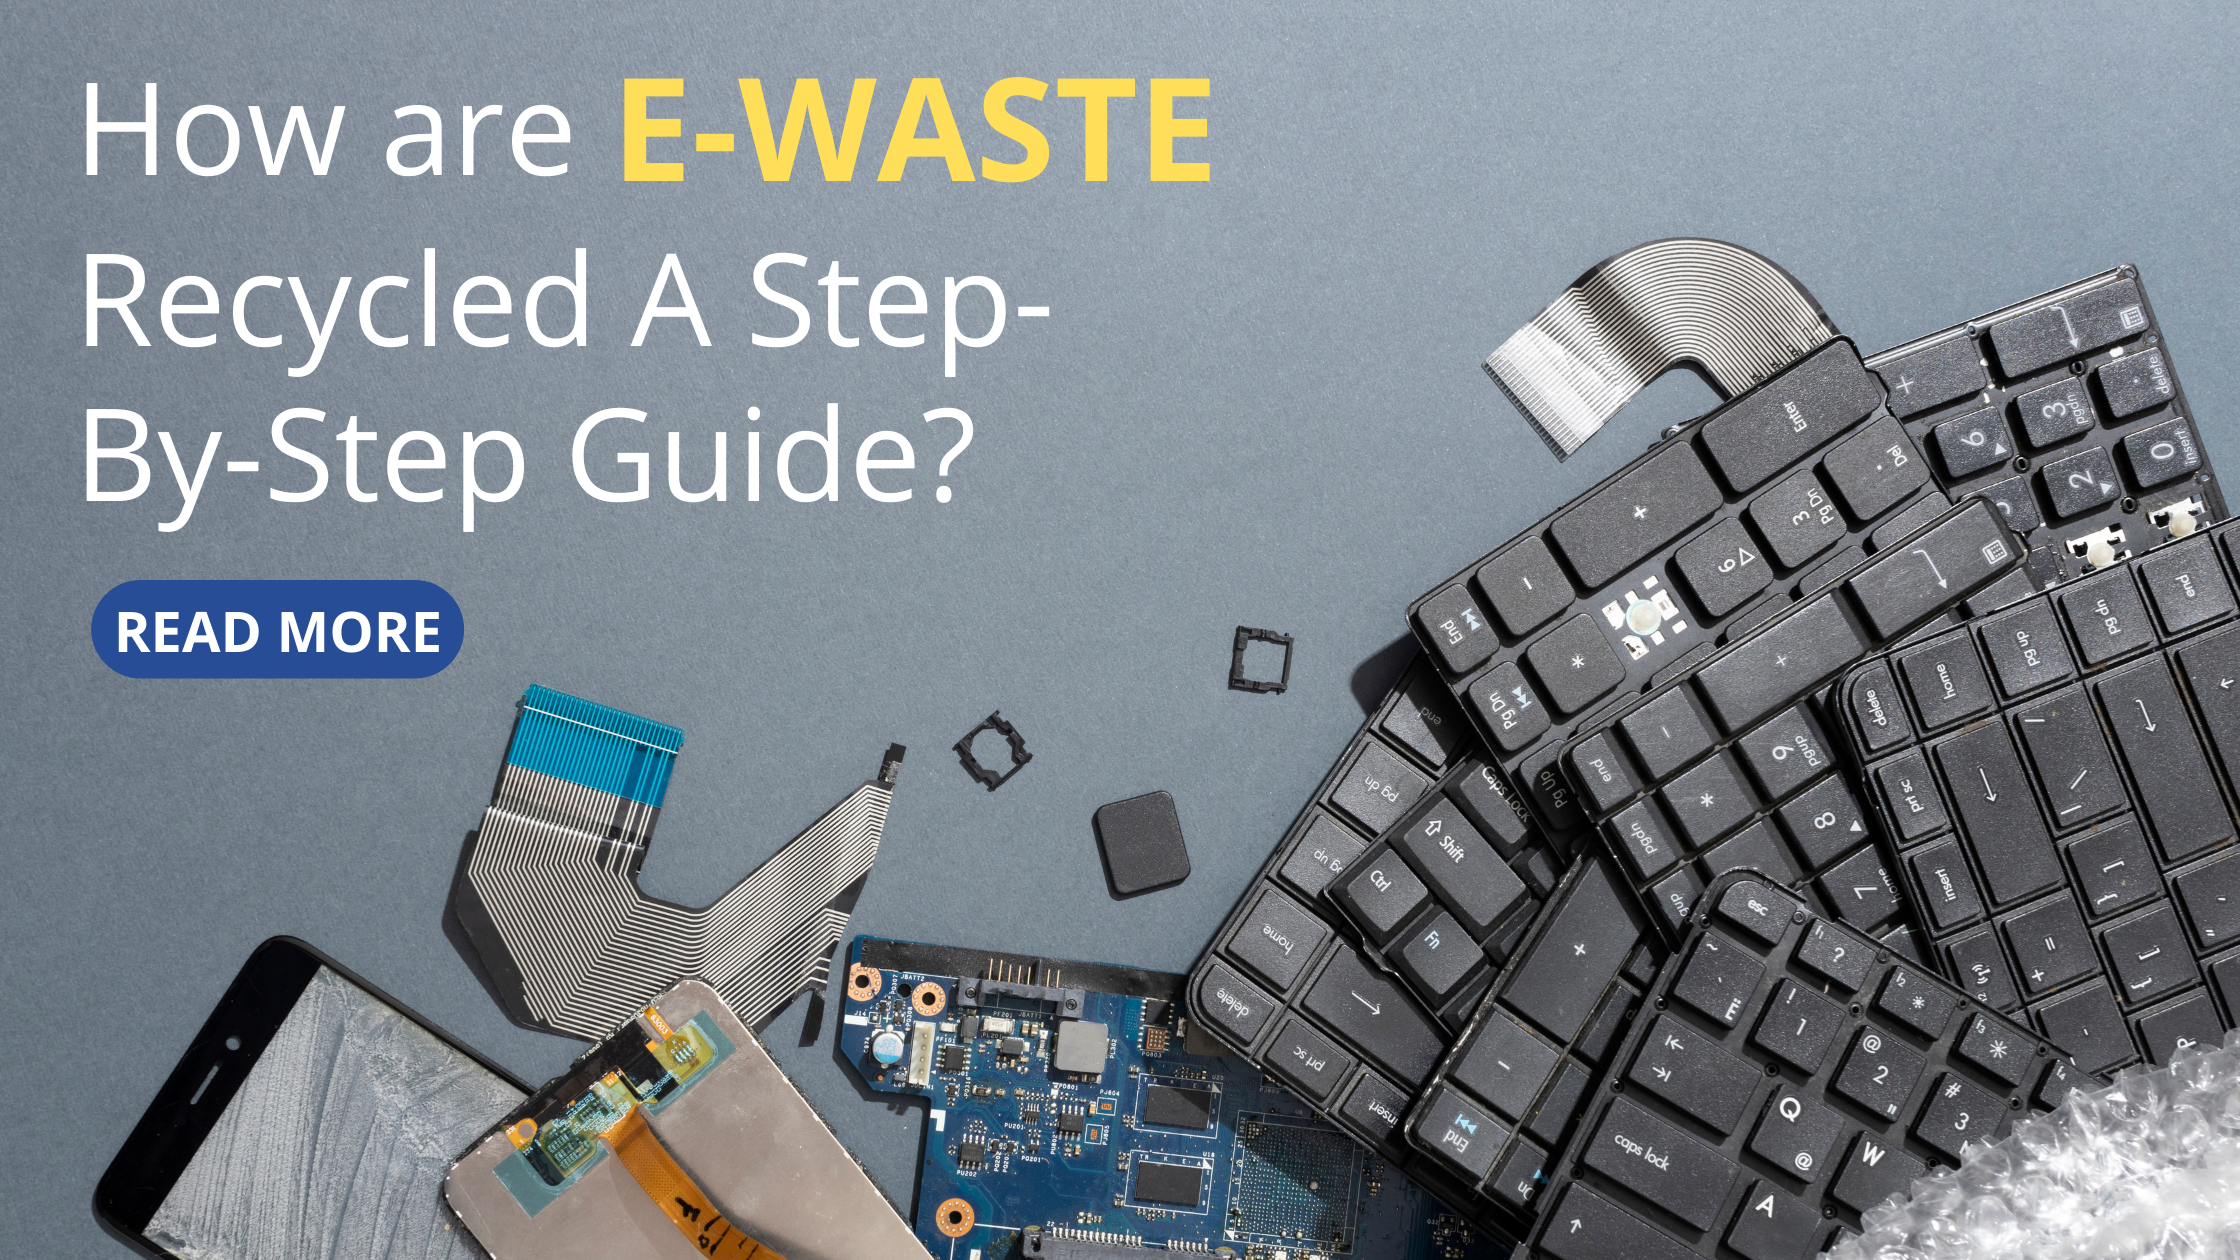 How are e-Waste Recycled A Step-By-Step Guide?